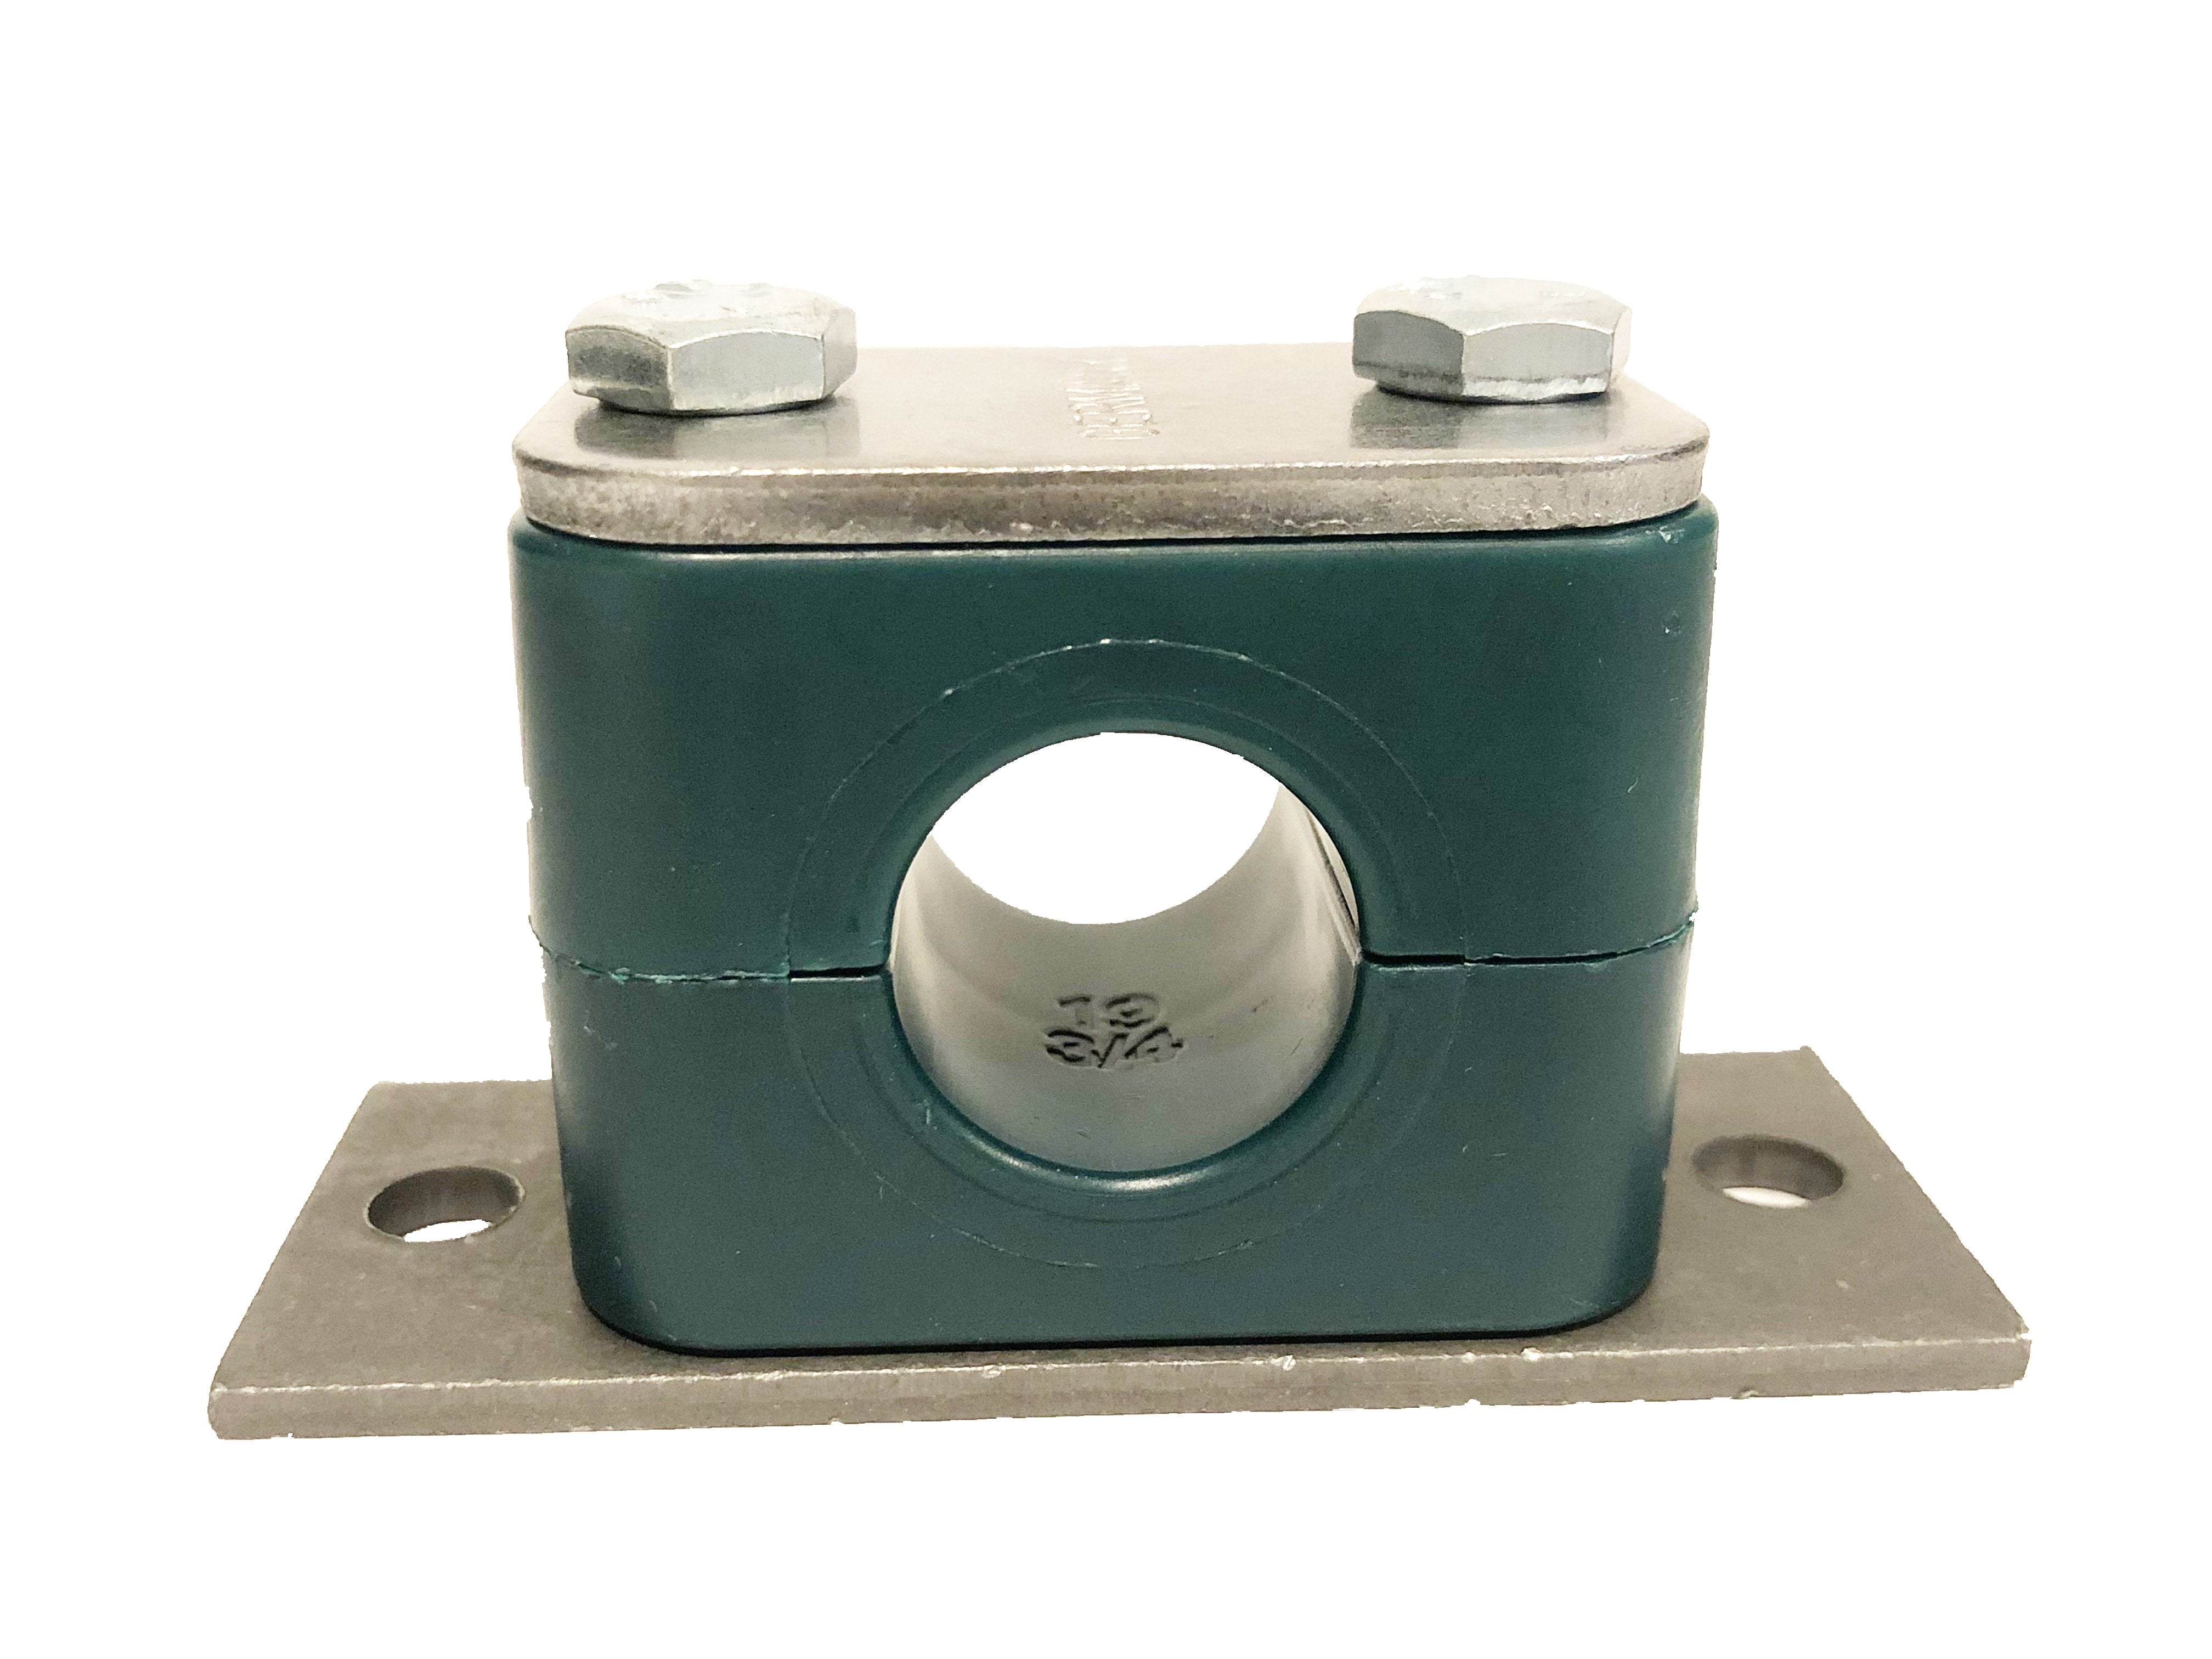 SPV-648.3-PP-H-DP-AS-U-W10 : Stauff Clamp, Elongated Weld Plate, 1.9" (48.3mm) OD, for 1.5" Pipe, Green PP Insert, Smooth Interior, Carbon Steel